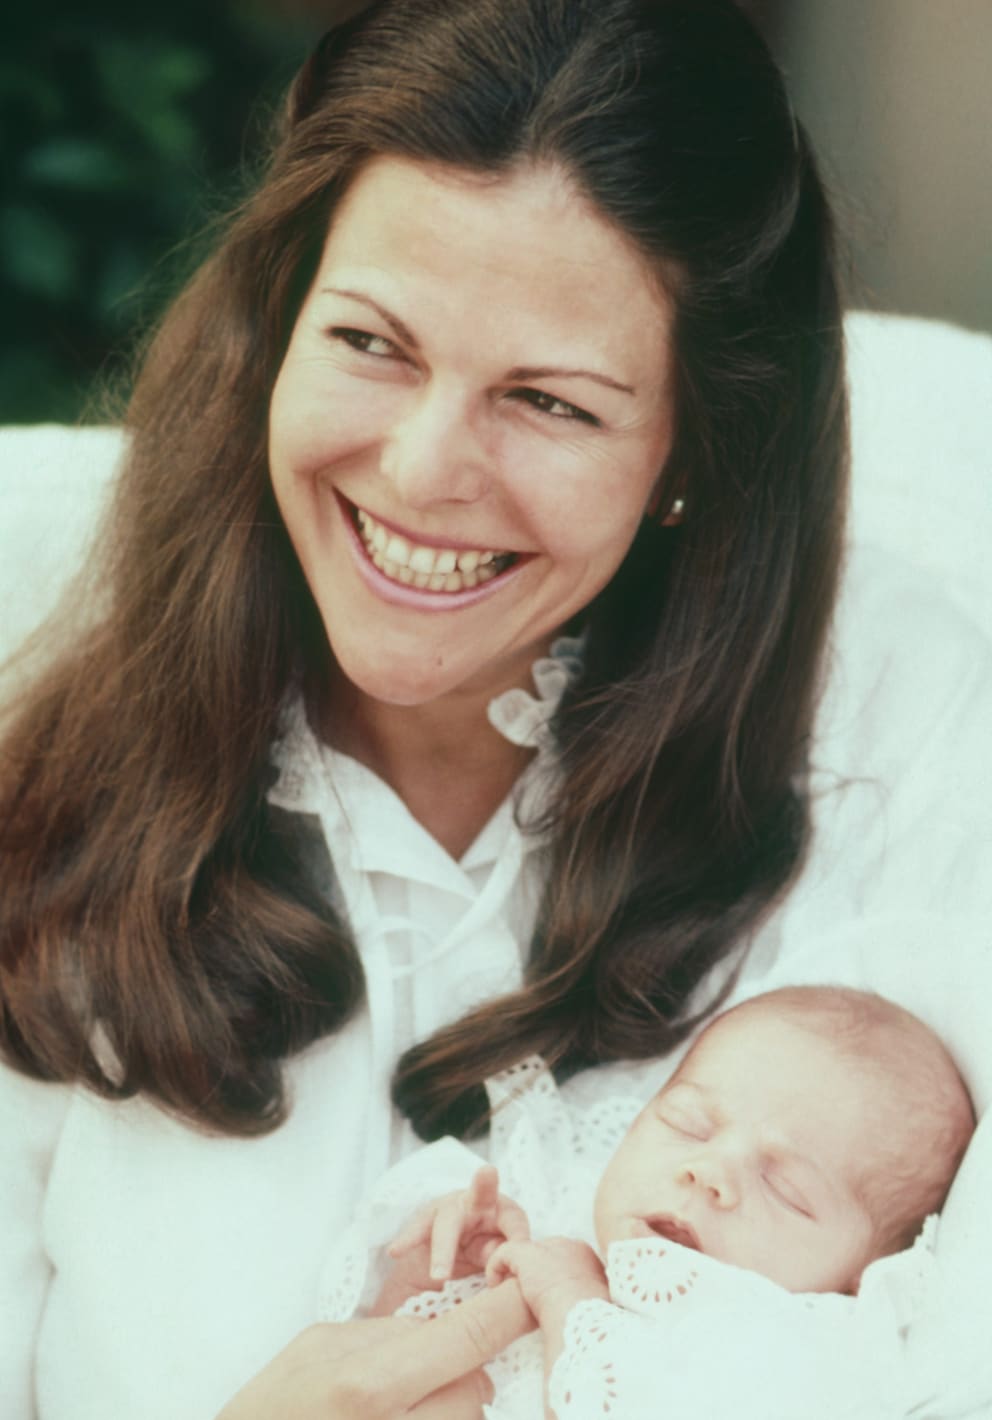 The first child, Crown Princess Victoria, was born on July 14, 1977